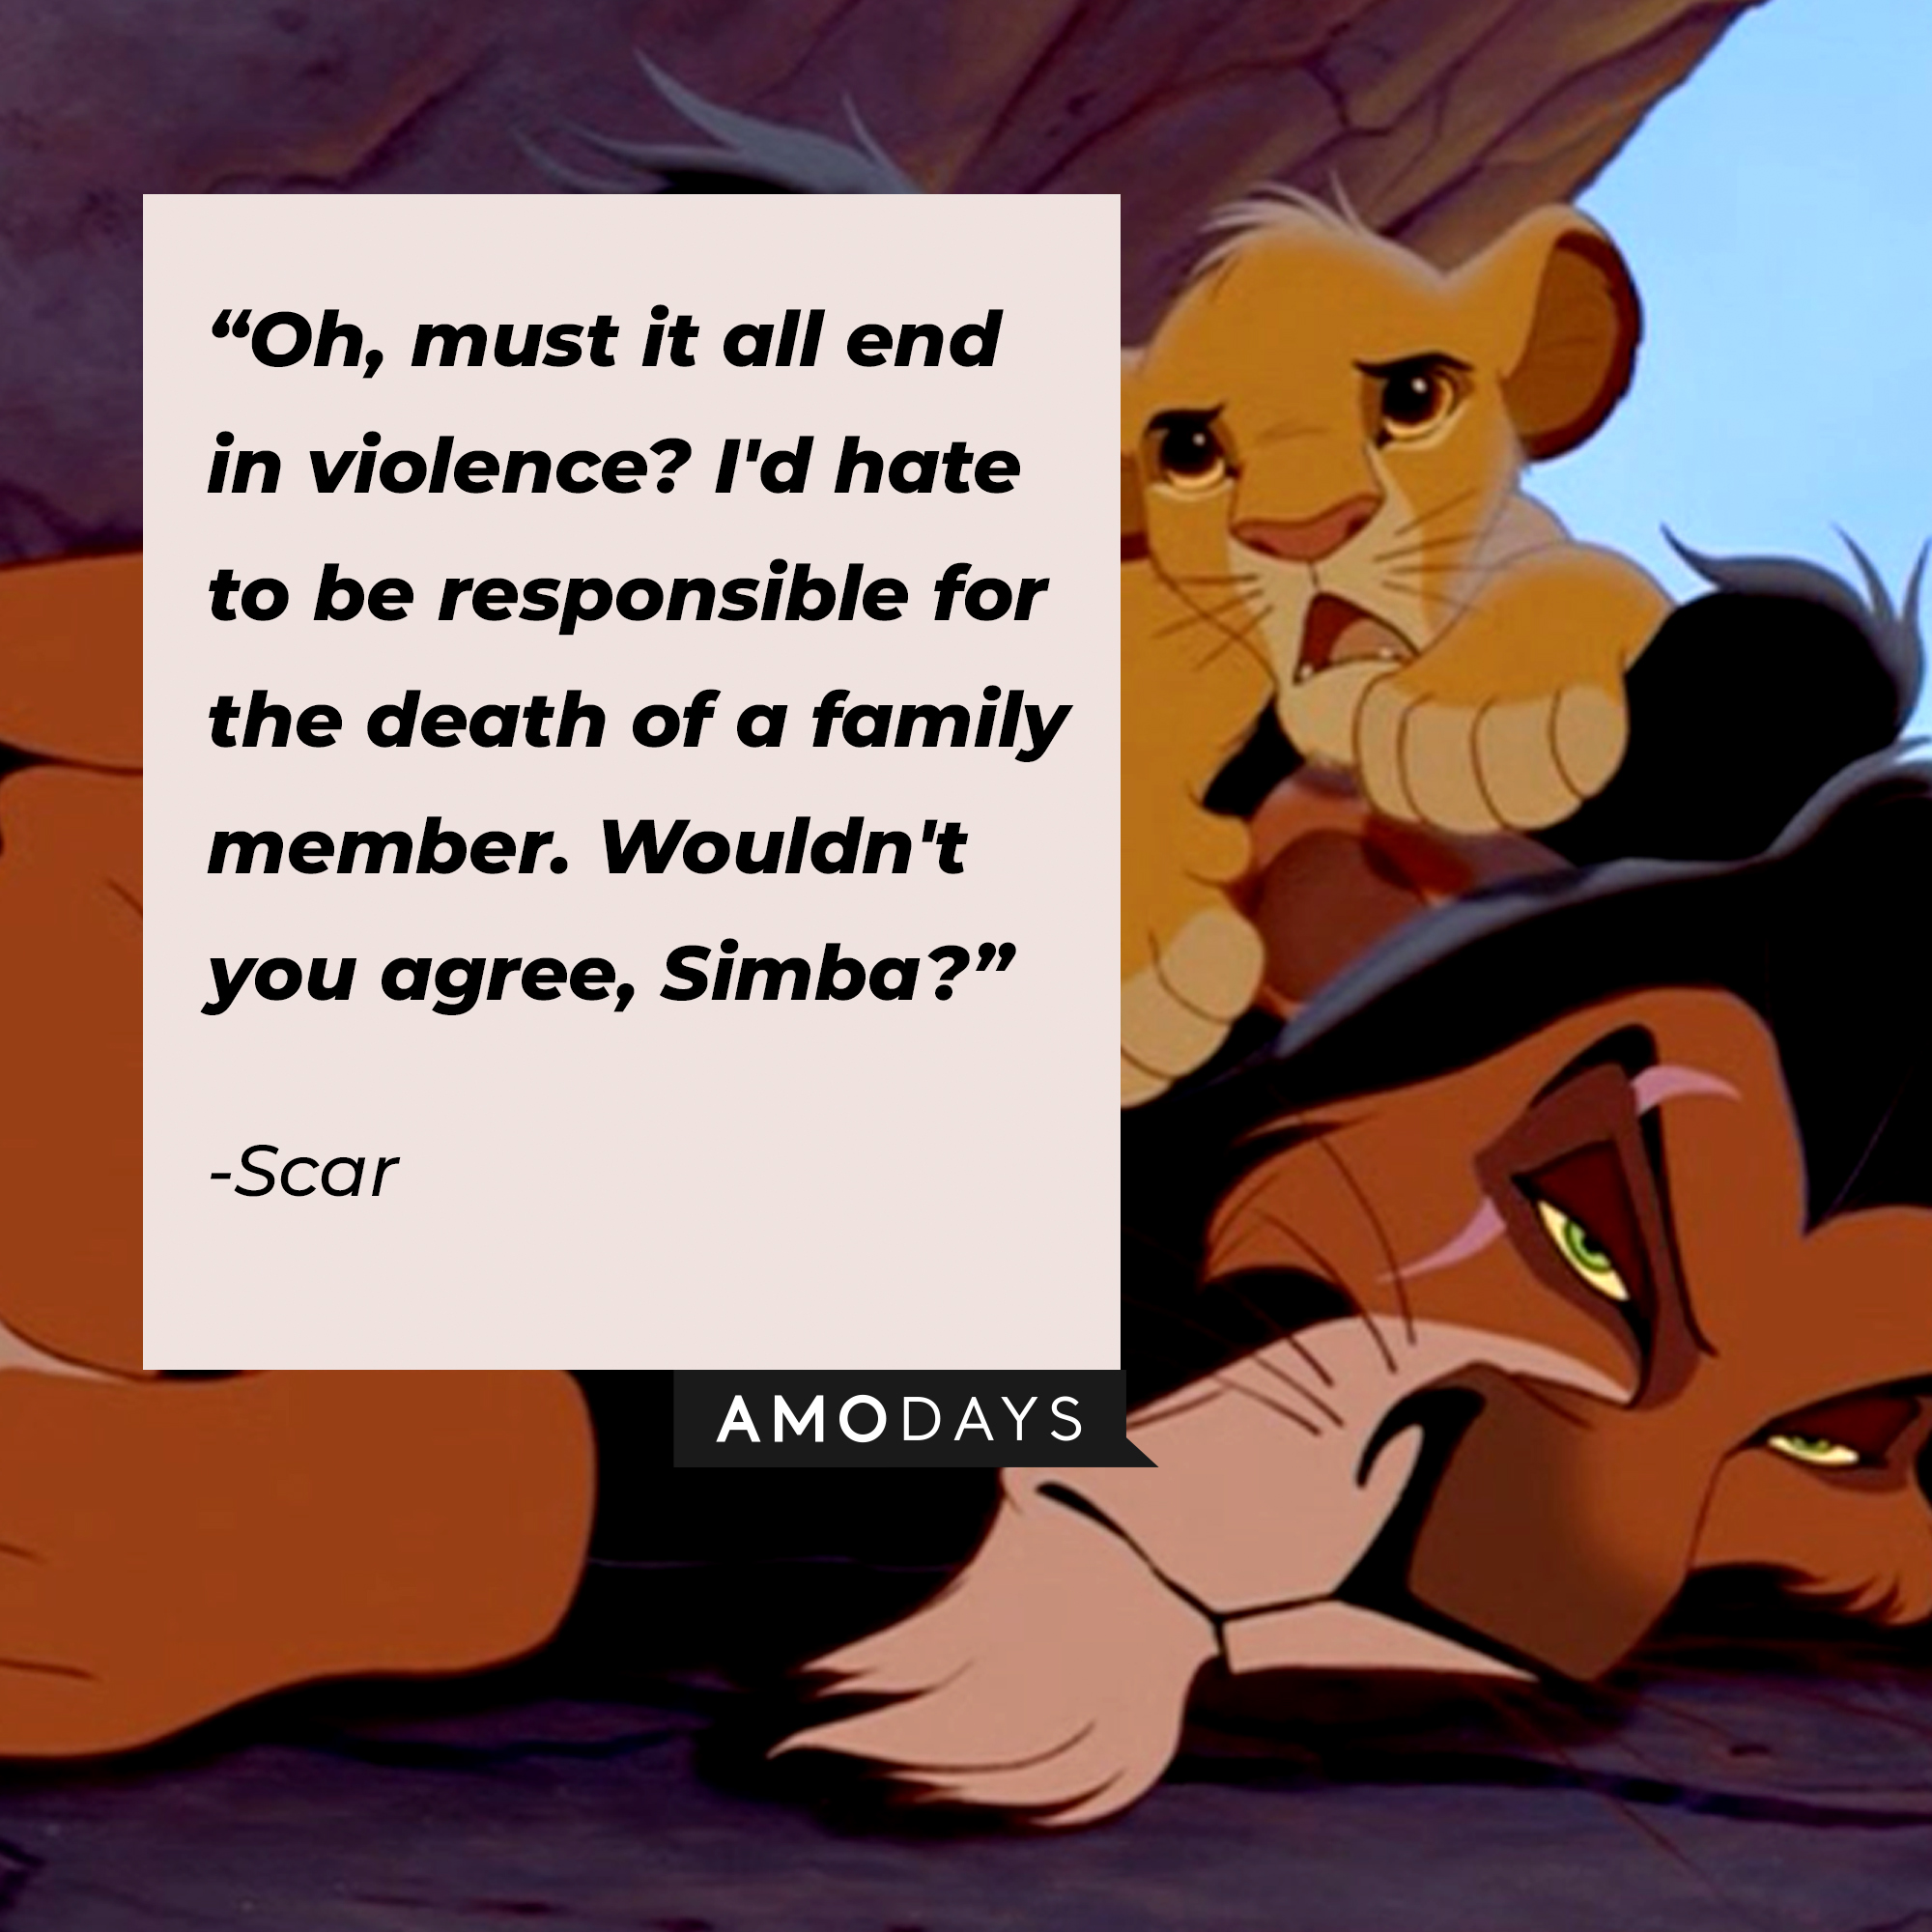 "Oh, must it all end in violence? I'd hate to be responsible for the death of a family member. Wouldn't you agree, Simba?" | Source: Facebook/DisneyTheLionKing